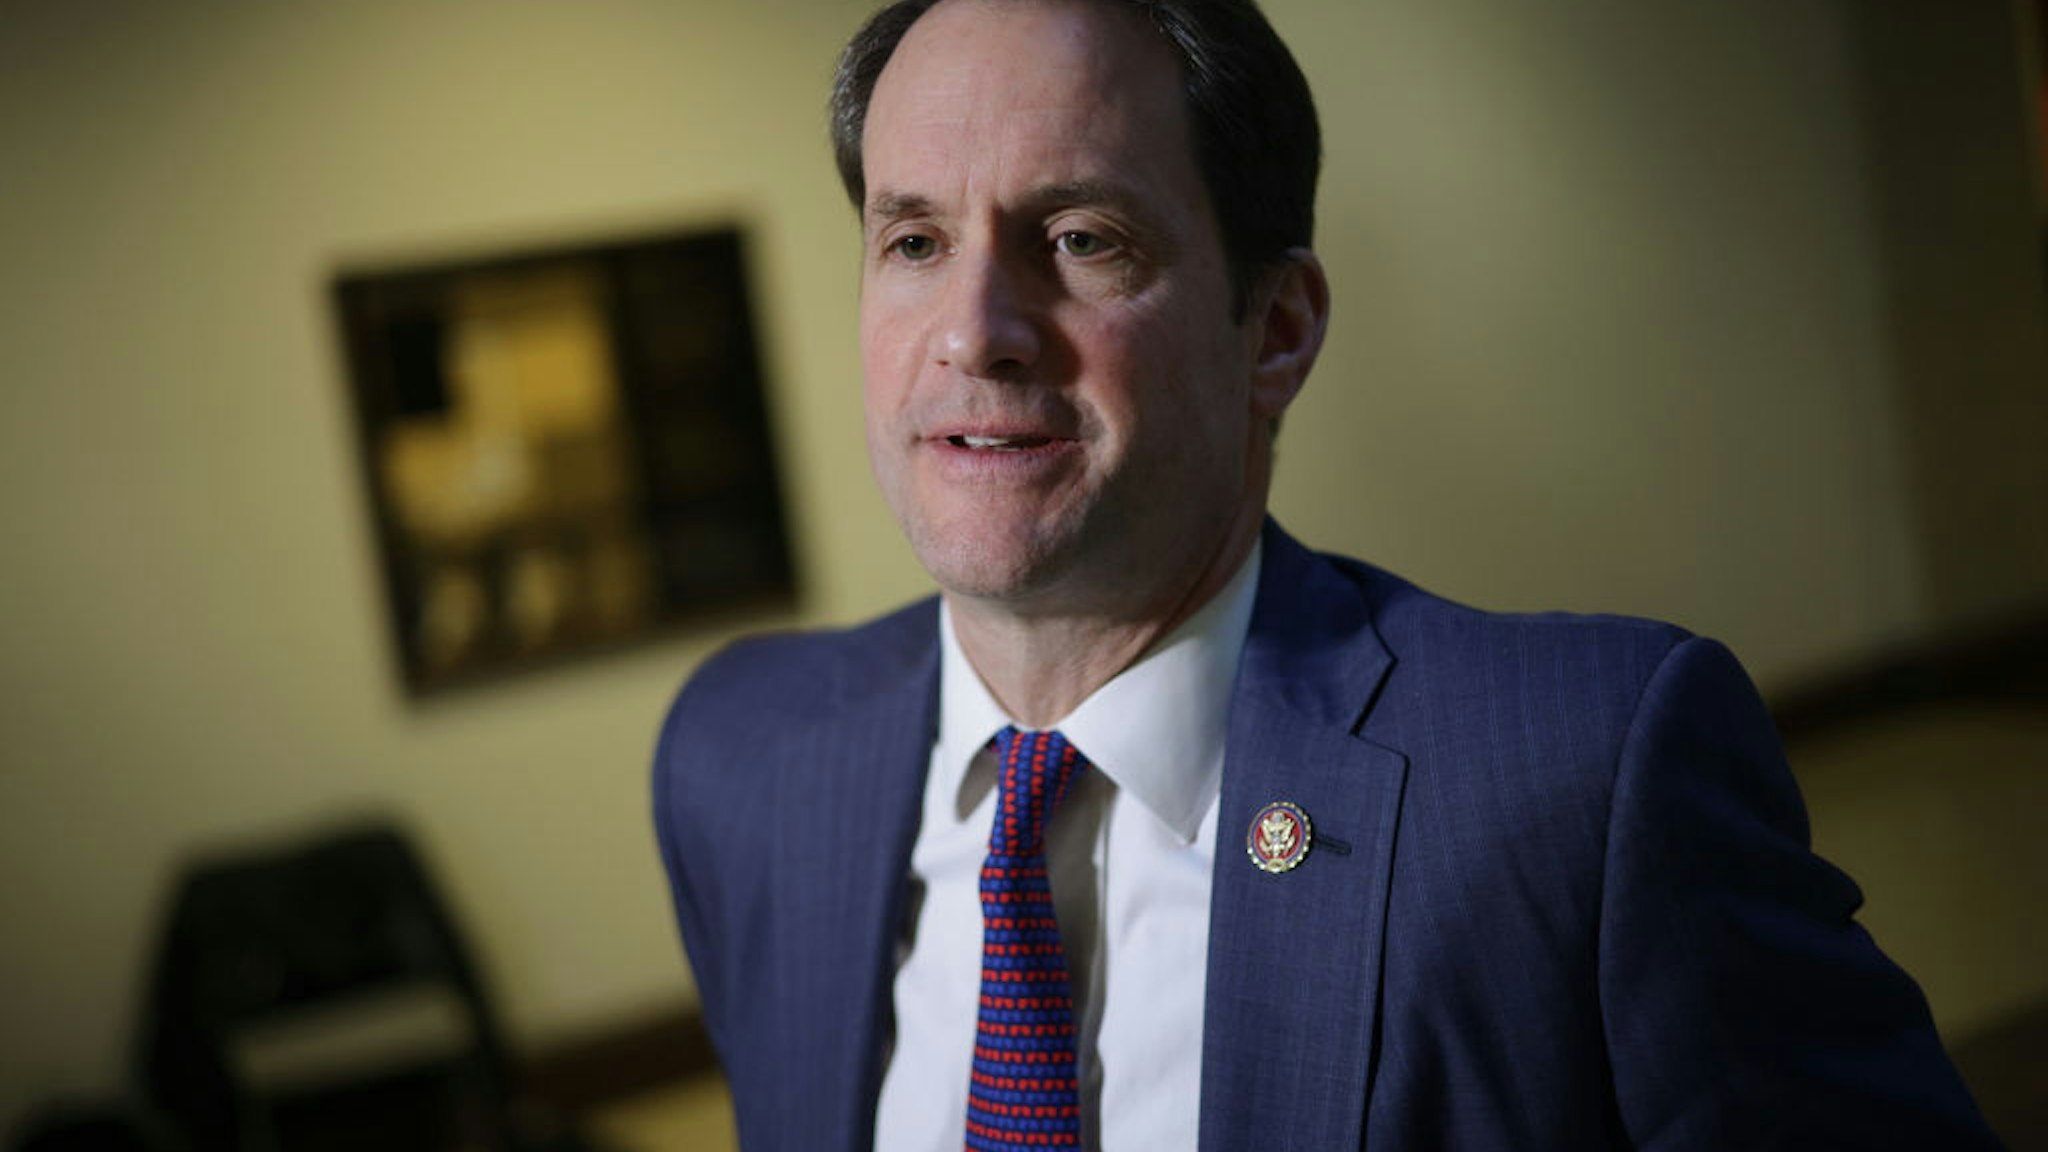 WASHINGTON, DC - FEBRUARY 14: U.S. Rep. Jim Himes (D-CT) speaks to members of the press after a briefing at the U.S. Capitol on February 14, 2024 in Washington, DC. Earlier in the day, Turner released a public statement warning members of Congress about a "serious national security threat" without giving any information about the nature of the threat and demanded that President Joe Biden declassify the information. (Photo by Alex Wong/Getty Images)